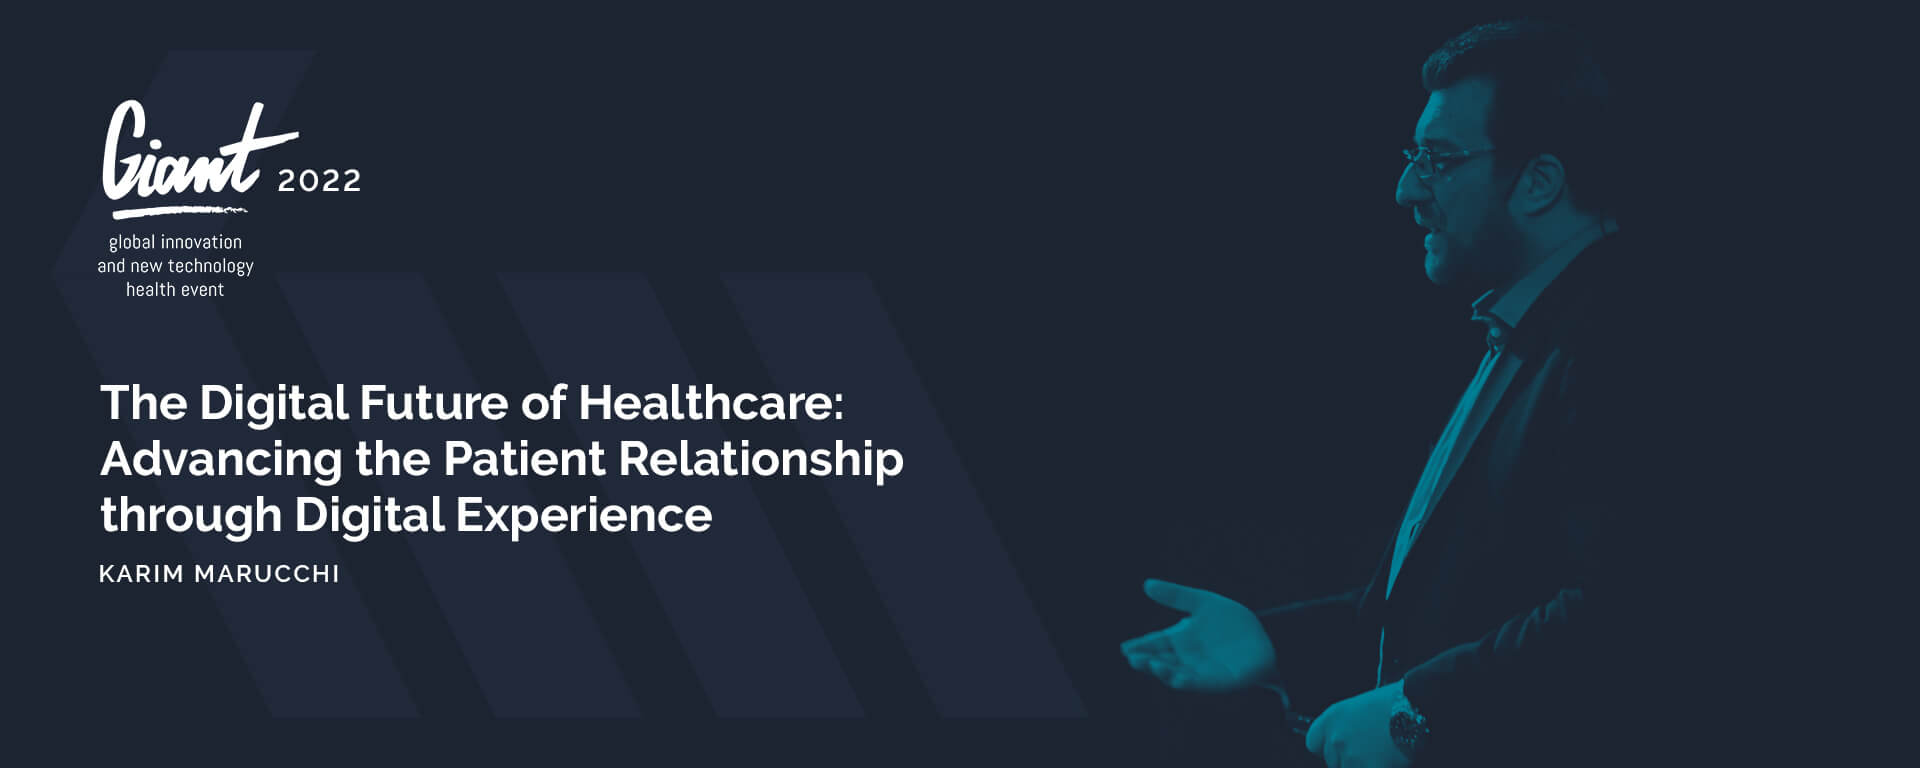 The Digital Future of Healthcare: Advancing the Patient Relationship through Digital Experience Technology